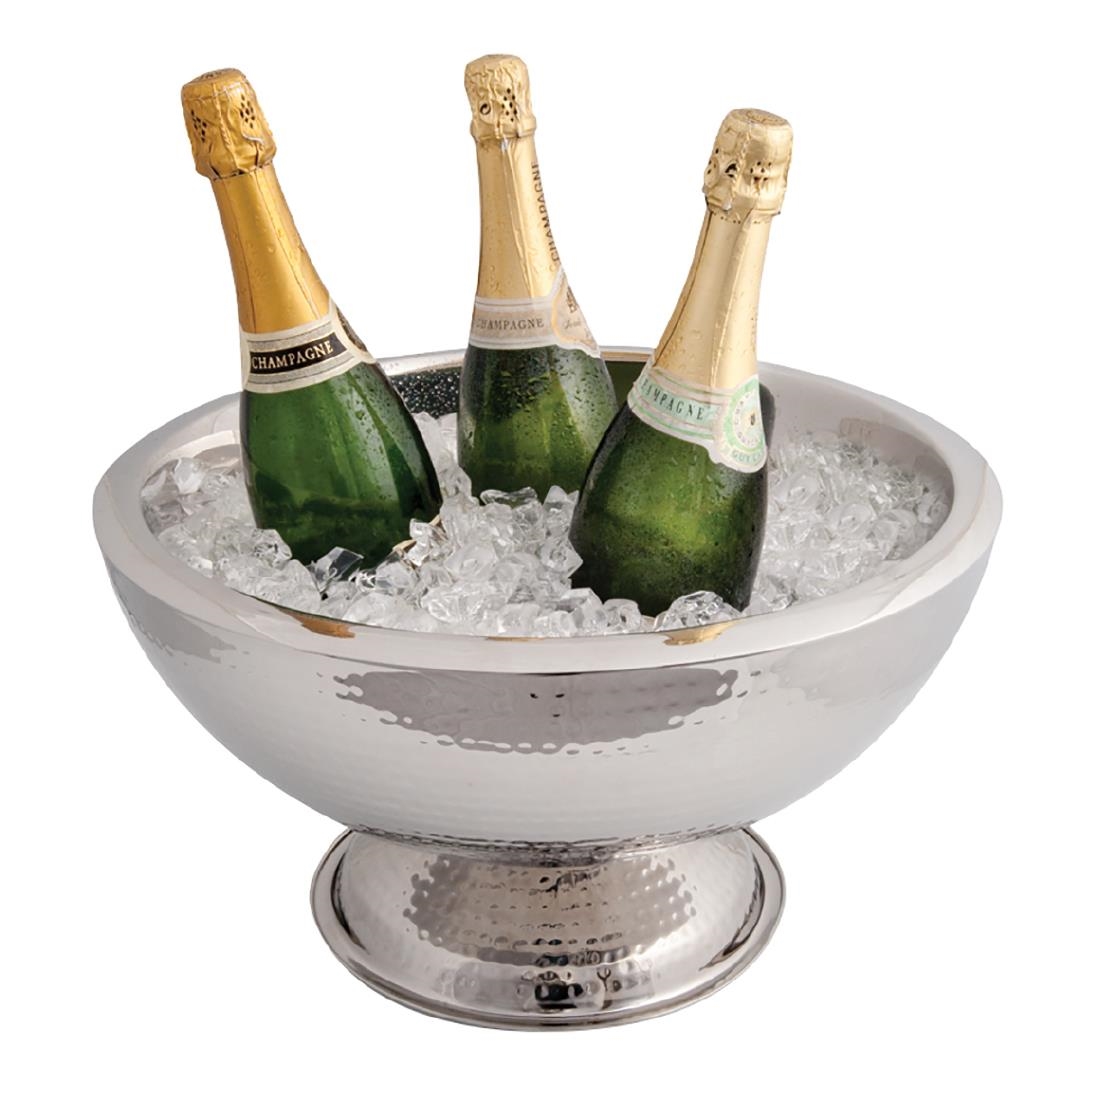 Bellagio Stainless Steel Wine-Champagne Bowl-Cooler (CZ671)